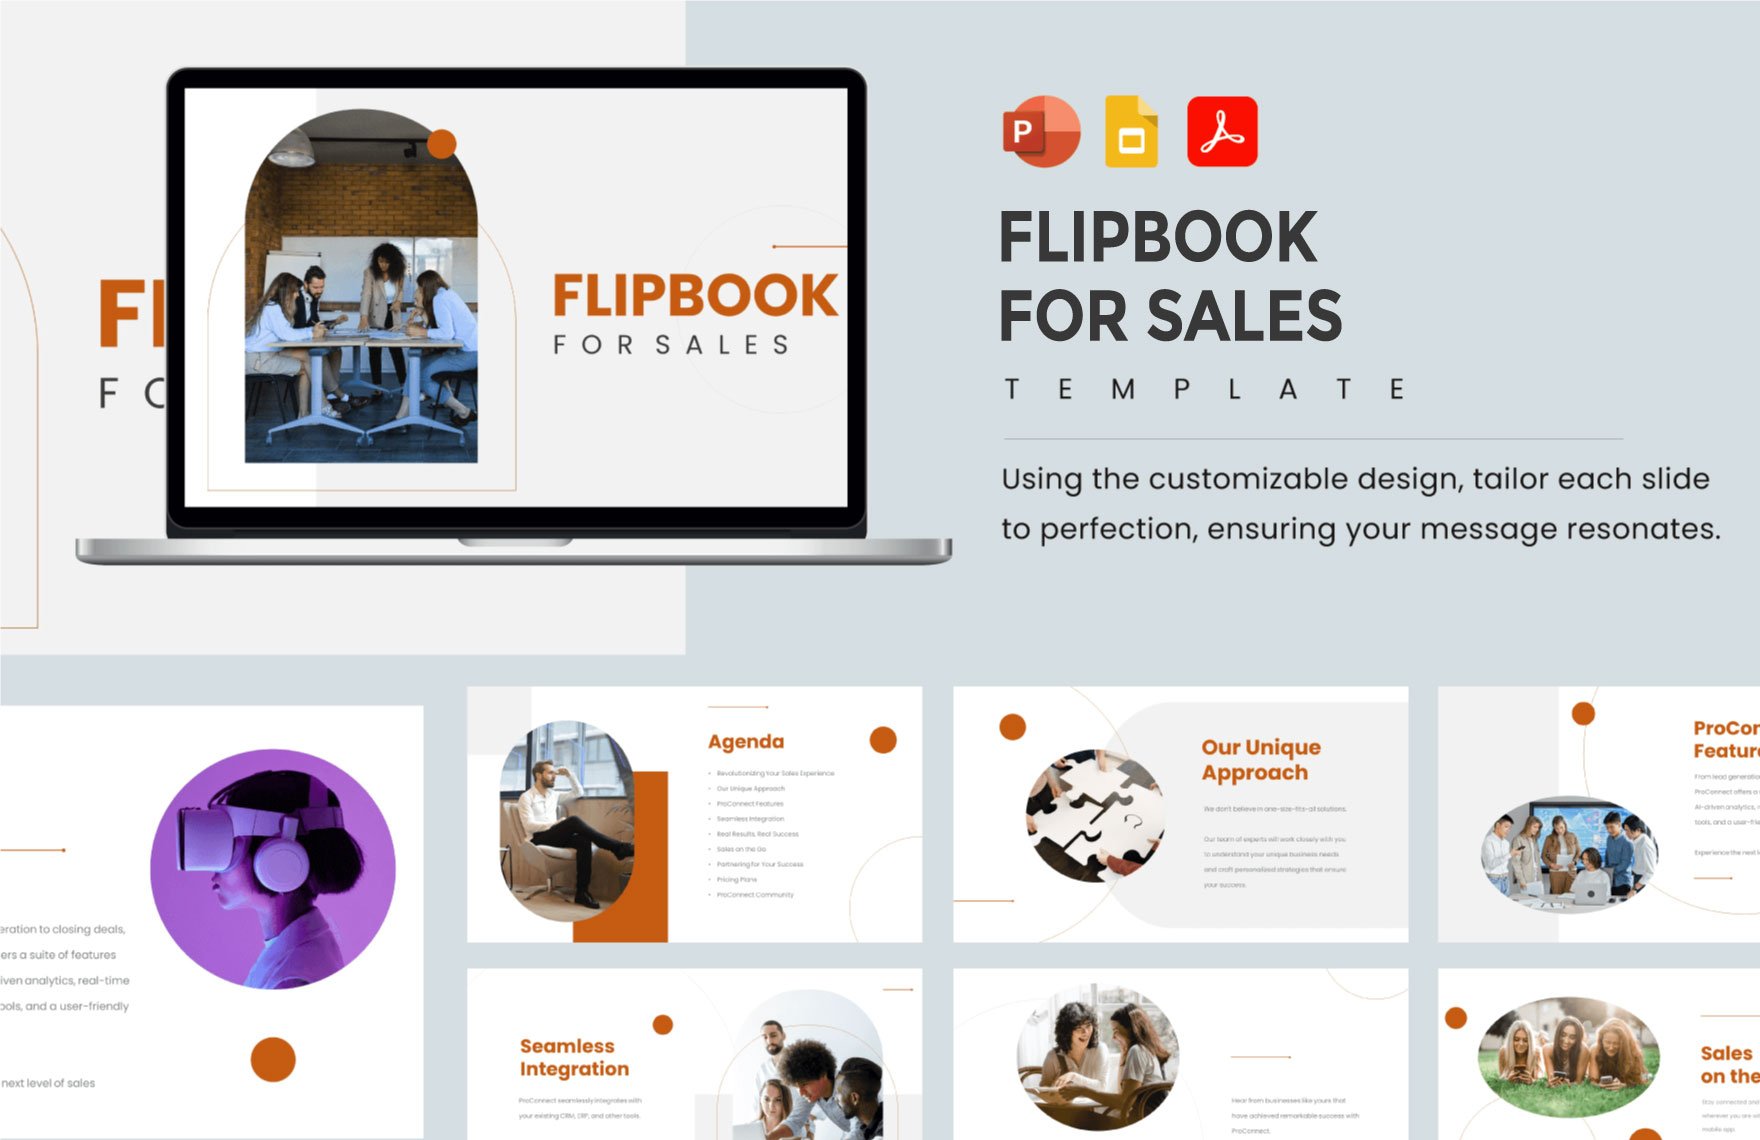 Free Flipbook for Sales Template